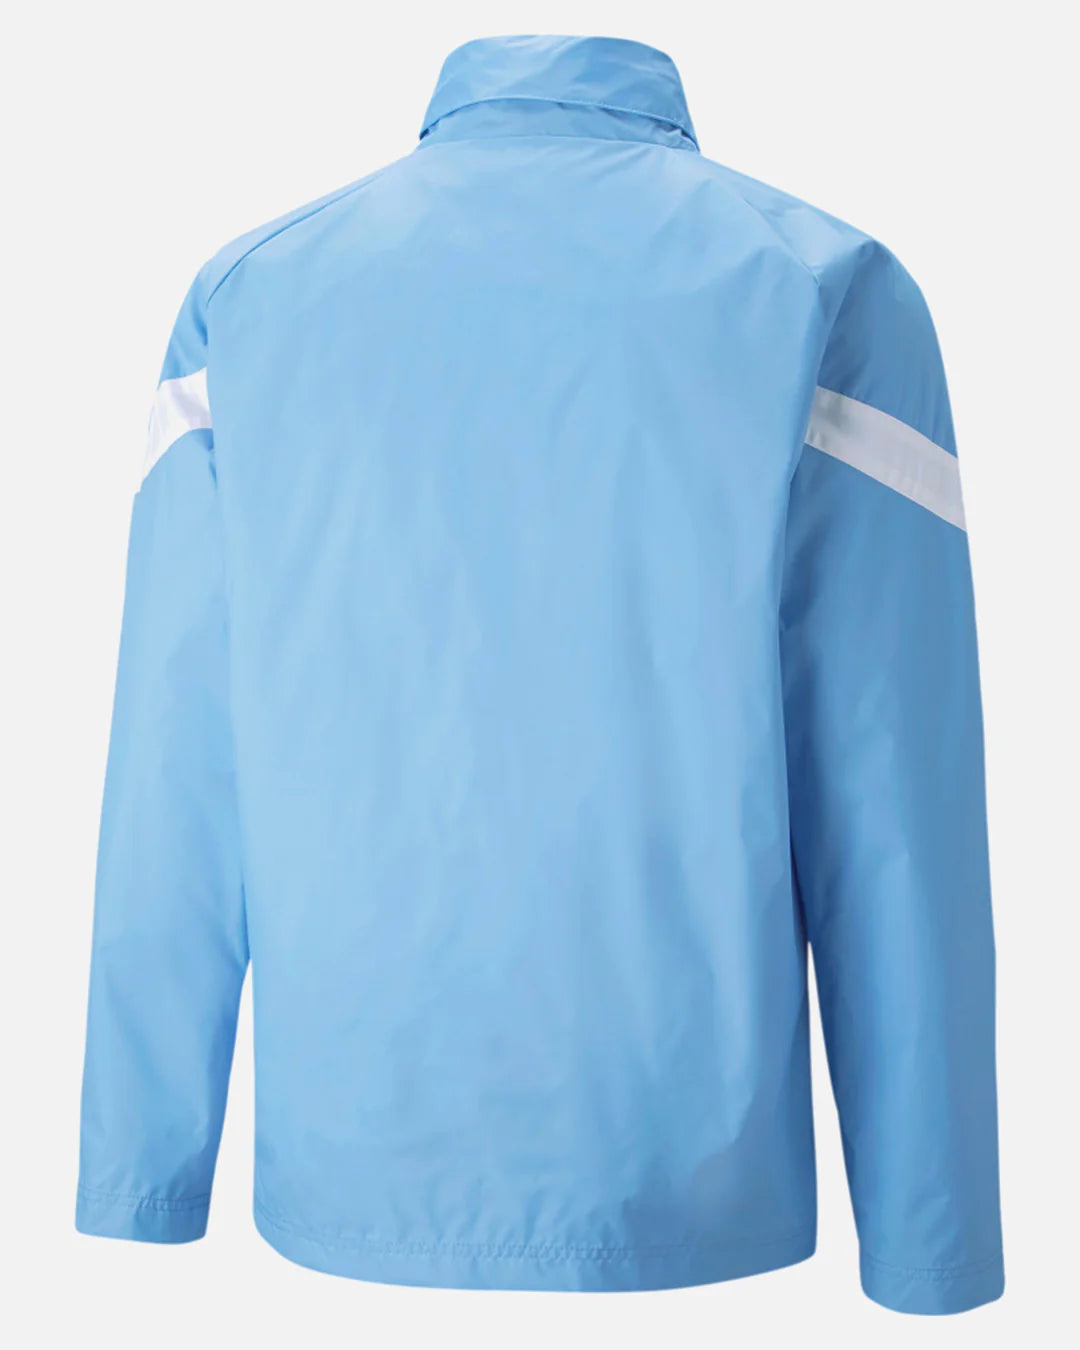 Manchester City Tracksuit 2022/2023 - Blue/White